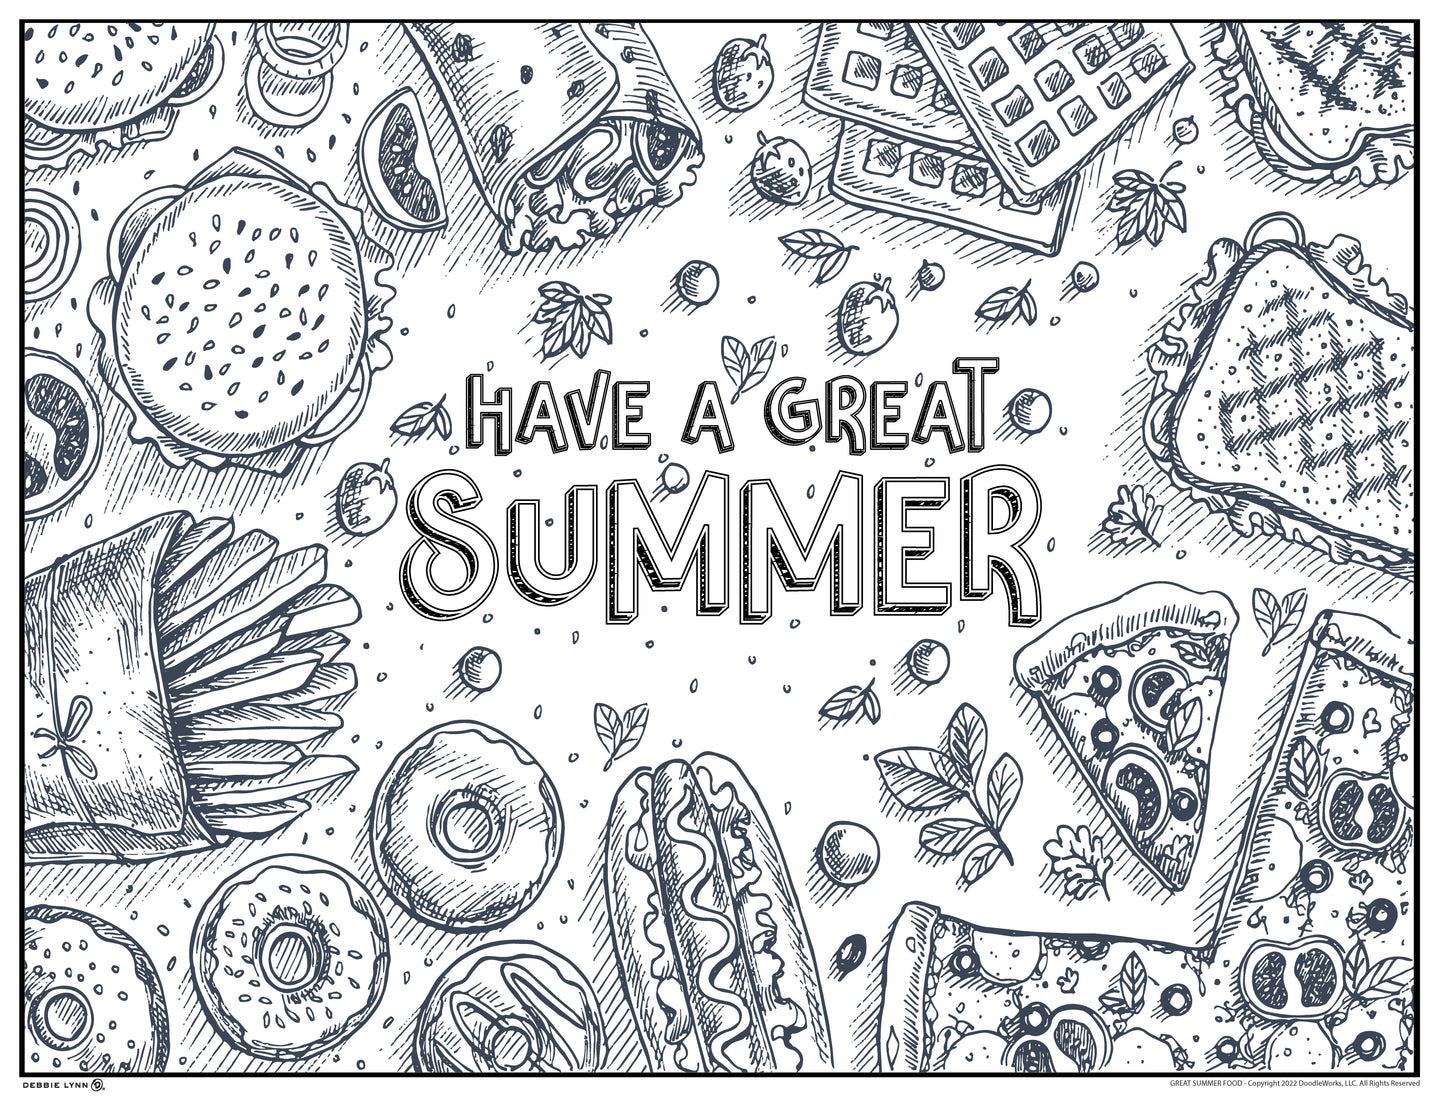 Summer Food Personalized Giant Coloring Poster 46"x60"